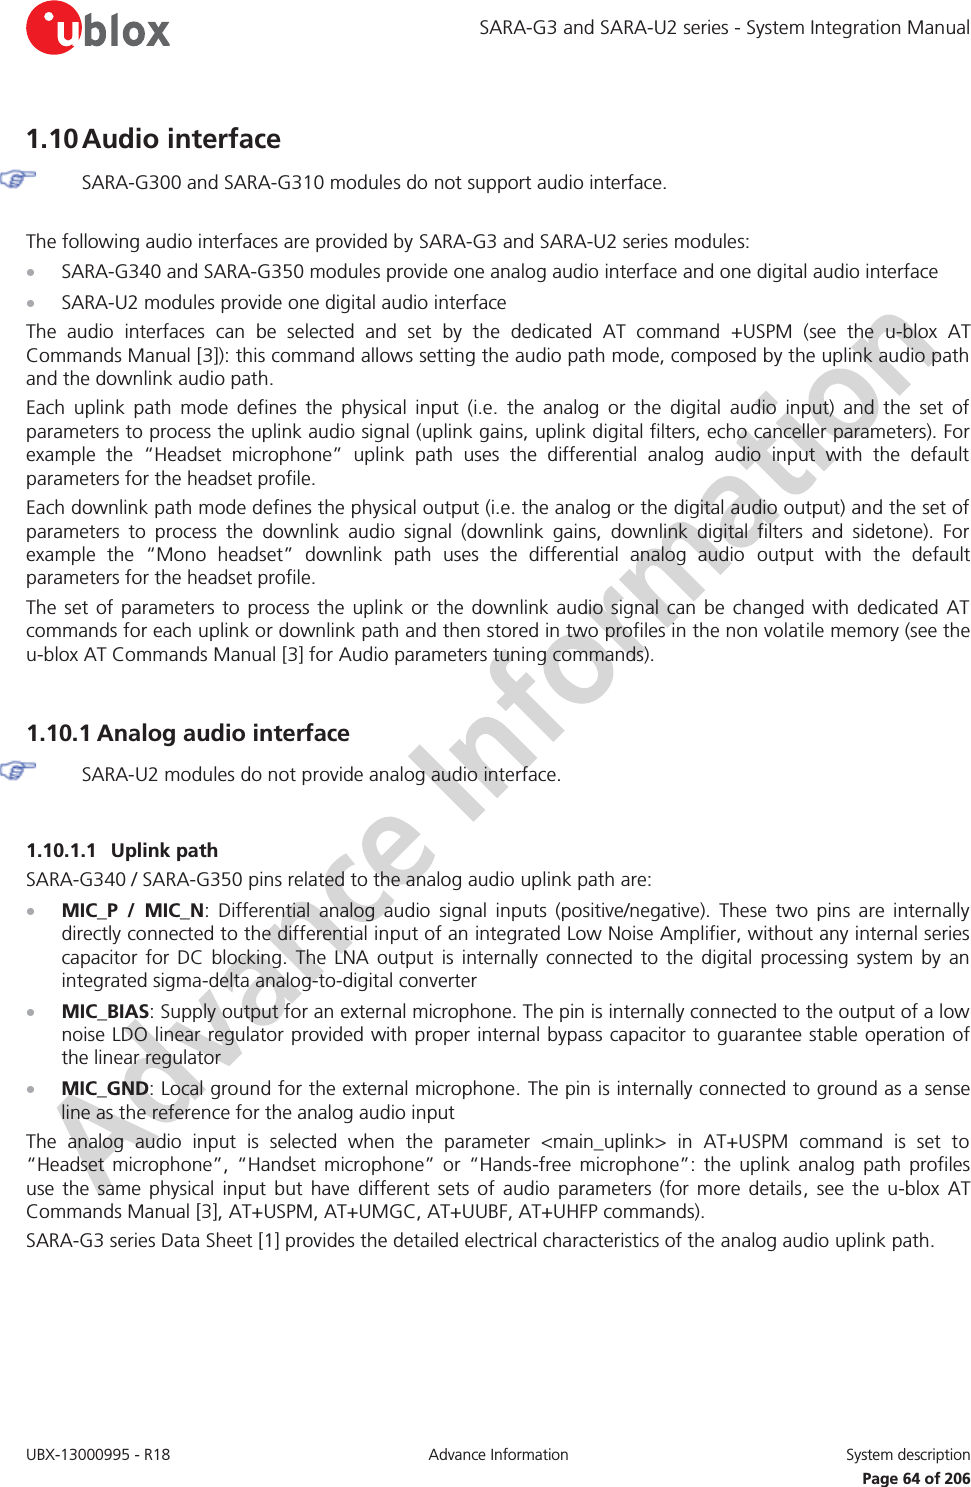 SARA-G3 and SARA-U2 series - System Integration Manual UBX-13000995 - R18  Advance Information  System description   Page 64 of 206 1.10 Audio interface  SARA-G300 and SARA-G310 modules do not support audio interface.  The following audio interfaces are provided by SARA-G3 and SARA-U2 series modules: x SARA-G340 and SARA-G350 modules provide one analog audio interface and one digital audio interface x SARA-U2 modules provide one digital audio interface The audio interfaces can be selected and set by the dedicated AT command +USPM (see the u-blox AT Commands Manual [3]): this command allows setting the audio path mode, composed by the uplink audio path and the downlink audio path. Each uplink path mode defines the physical input (i.e. the analog or the digital audio input) and the set of parameters to process the uplink audio signal (uplink gains, uplink digital filters, echo canceller parameters). For example the “Headset microphone” uplink path uses the differential analog audio input with the default parameters for the headset profile. Each downlink path mode defines the physical output (i.e. the analog or the digital audio output) and the set of parameters to process the downlink audio signal (downlink gains, downlink digital filters and sidetone). For example the “Mono headset” downlink path uses the differential analog audio output with the default parameters for the headset profile. The set of parameters to process the uplink or the downlink audio signal can be changed with dedicated AT commands for each uplink or downlink path and then stored in two profiles in the non volatile memory (see the u-blox AT Commands Manual [3] for Audio parameters tuning commands).  1.10.1 Analog audio interface  SARA-U2 modules do not provide analog audio interface.  1.10.1.1 Uplink path SARA-G340 / SARA-G350 pins related to the analog audio uplink path are: x MIC_P / MIC_N: Differential analog audio signal inputs (positive/negative). These two pins are internally directly connected to the differential input of an integrated Low Noise Amplifier, without any internal series capacitor for DC blocking. The LNA output is internally connected to the digital processing system by an integrated sigma-delta analog-to-digital converter x MIC_BIAS: Supply output for an external microphone. The pin is internally connected to the output of a low noise LDO linear regulator provided with proper internal bypass capacitor to guarantee stable operation of the linear regulator x MIC_GND: Local ground for the external microphone. The pin is internally connected to ground as a sense line as the reference for the analog audio input The analog audio input is selected when the parameter &lt;main_uplink&gt; in AT+USPM command is set to “Headset microphone”, “Handset microphone” or “Hands-free microphone”: the uplink analog path profiles use the same physical input but have different sets of audio parameters (for more details, see the u-blox AT Commands Manual [3], AT+USPM, AT+UMGC, AT+UUBF, AT+UHFP commands). SARA-G3 series Data Sheet [1] provides the detailed electrical characteristics of the analog audio uplink path.  